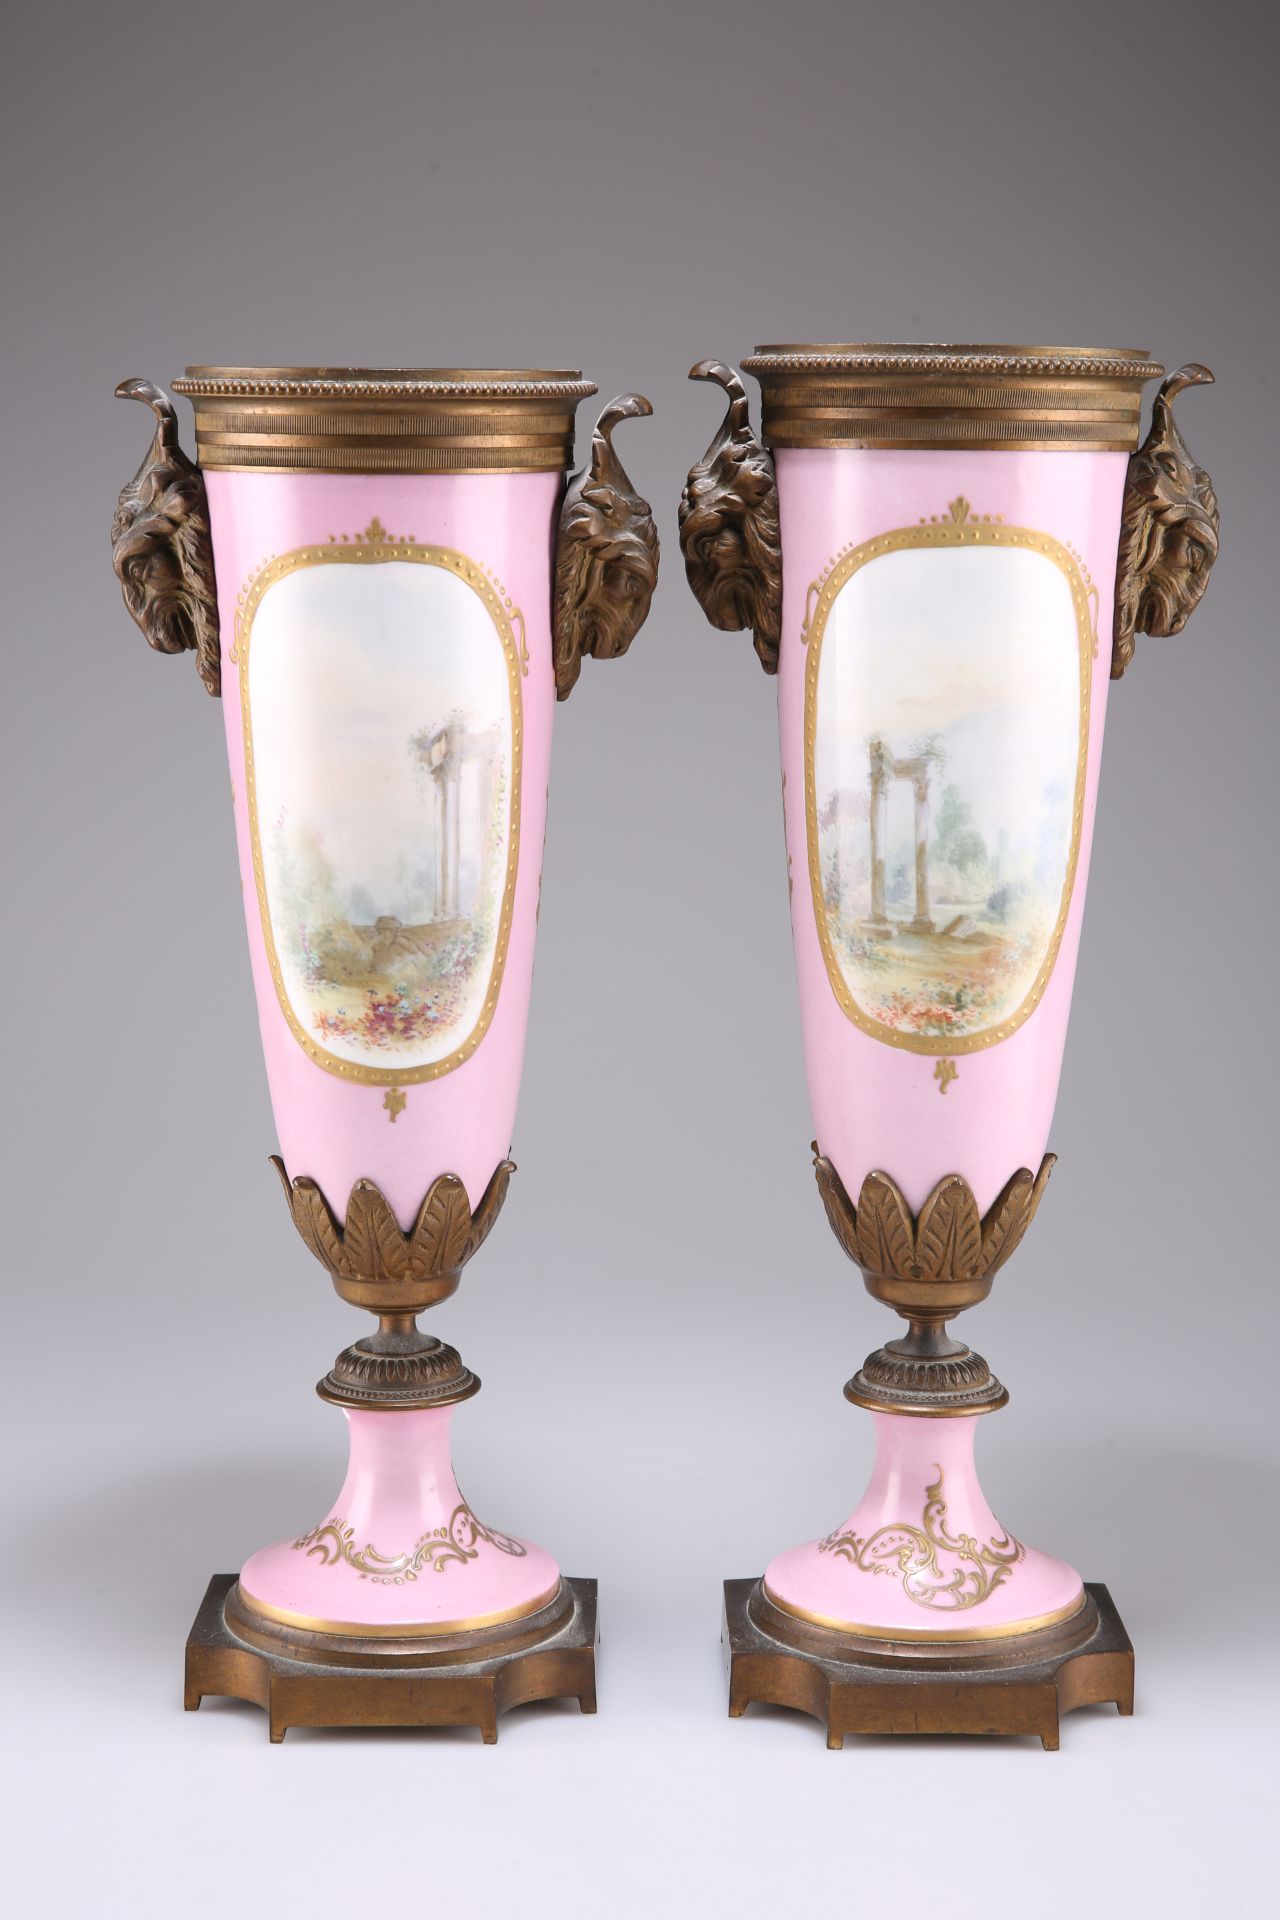 A PAIR OF 19TH CENTURY SÈVRES-STYLE GILT-METAL MOUNTED VASES - Image 2 of 2